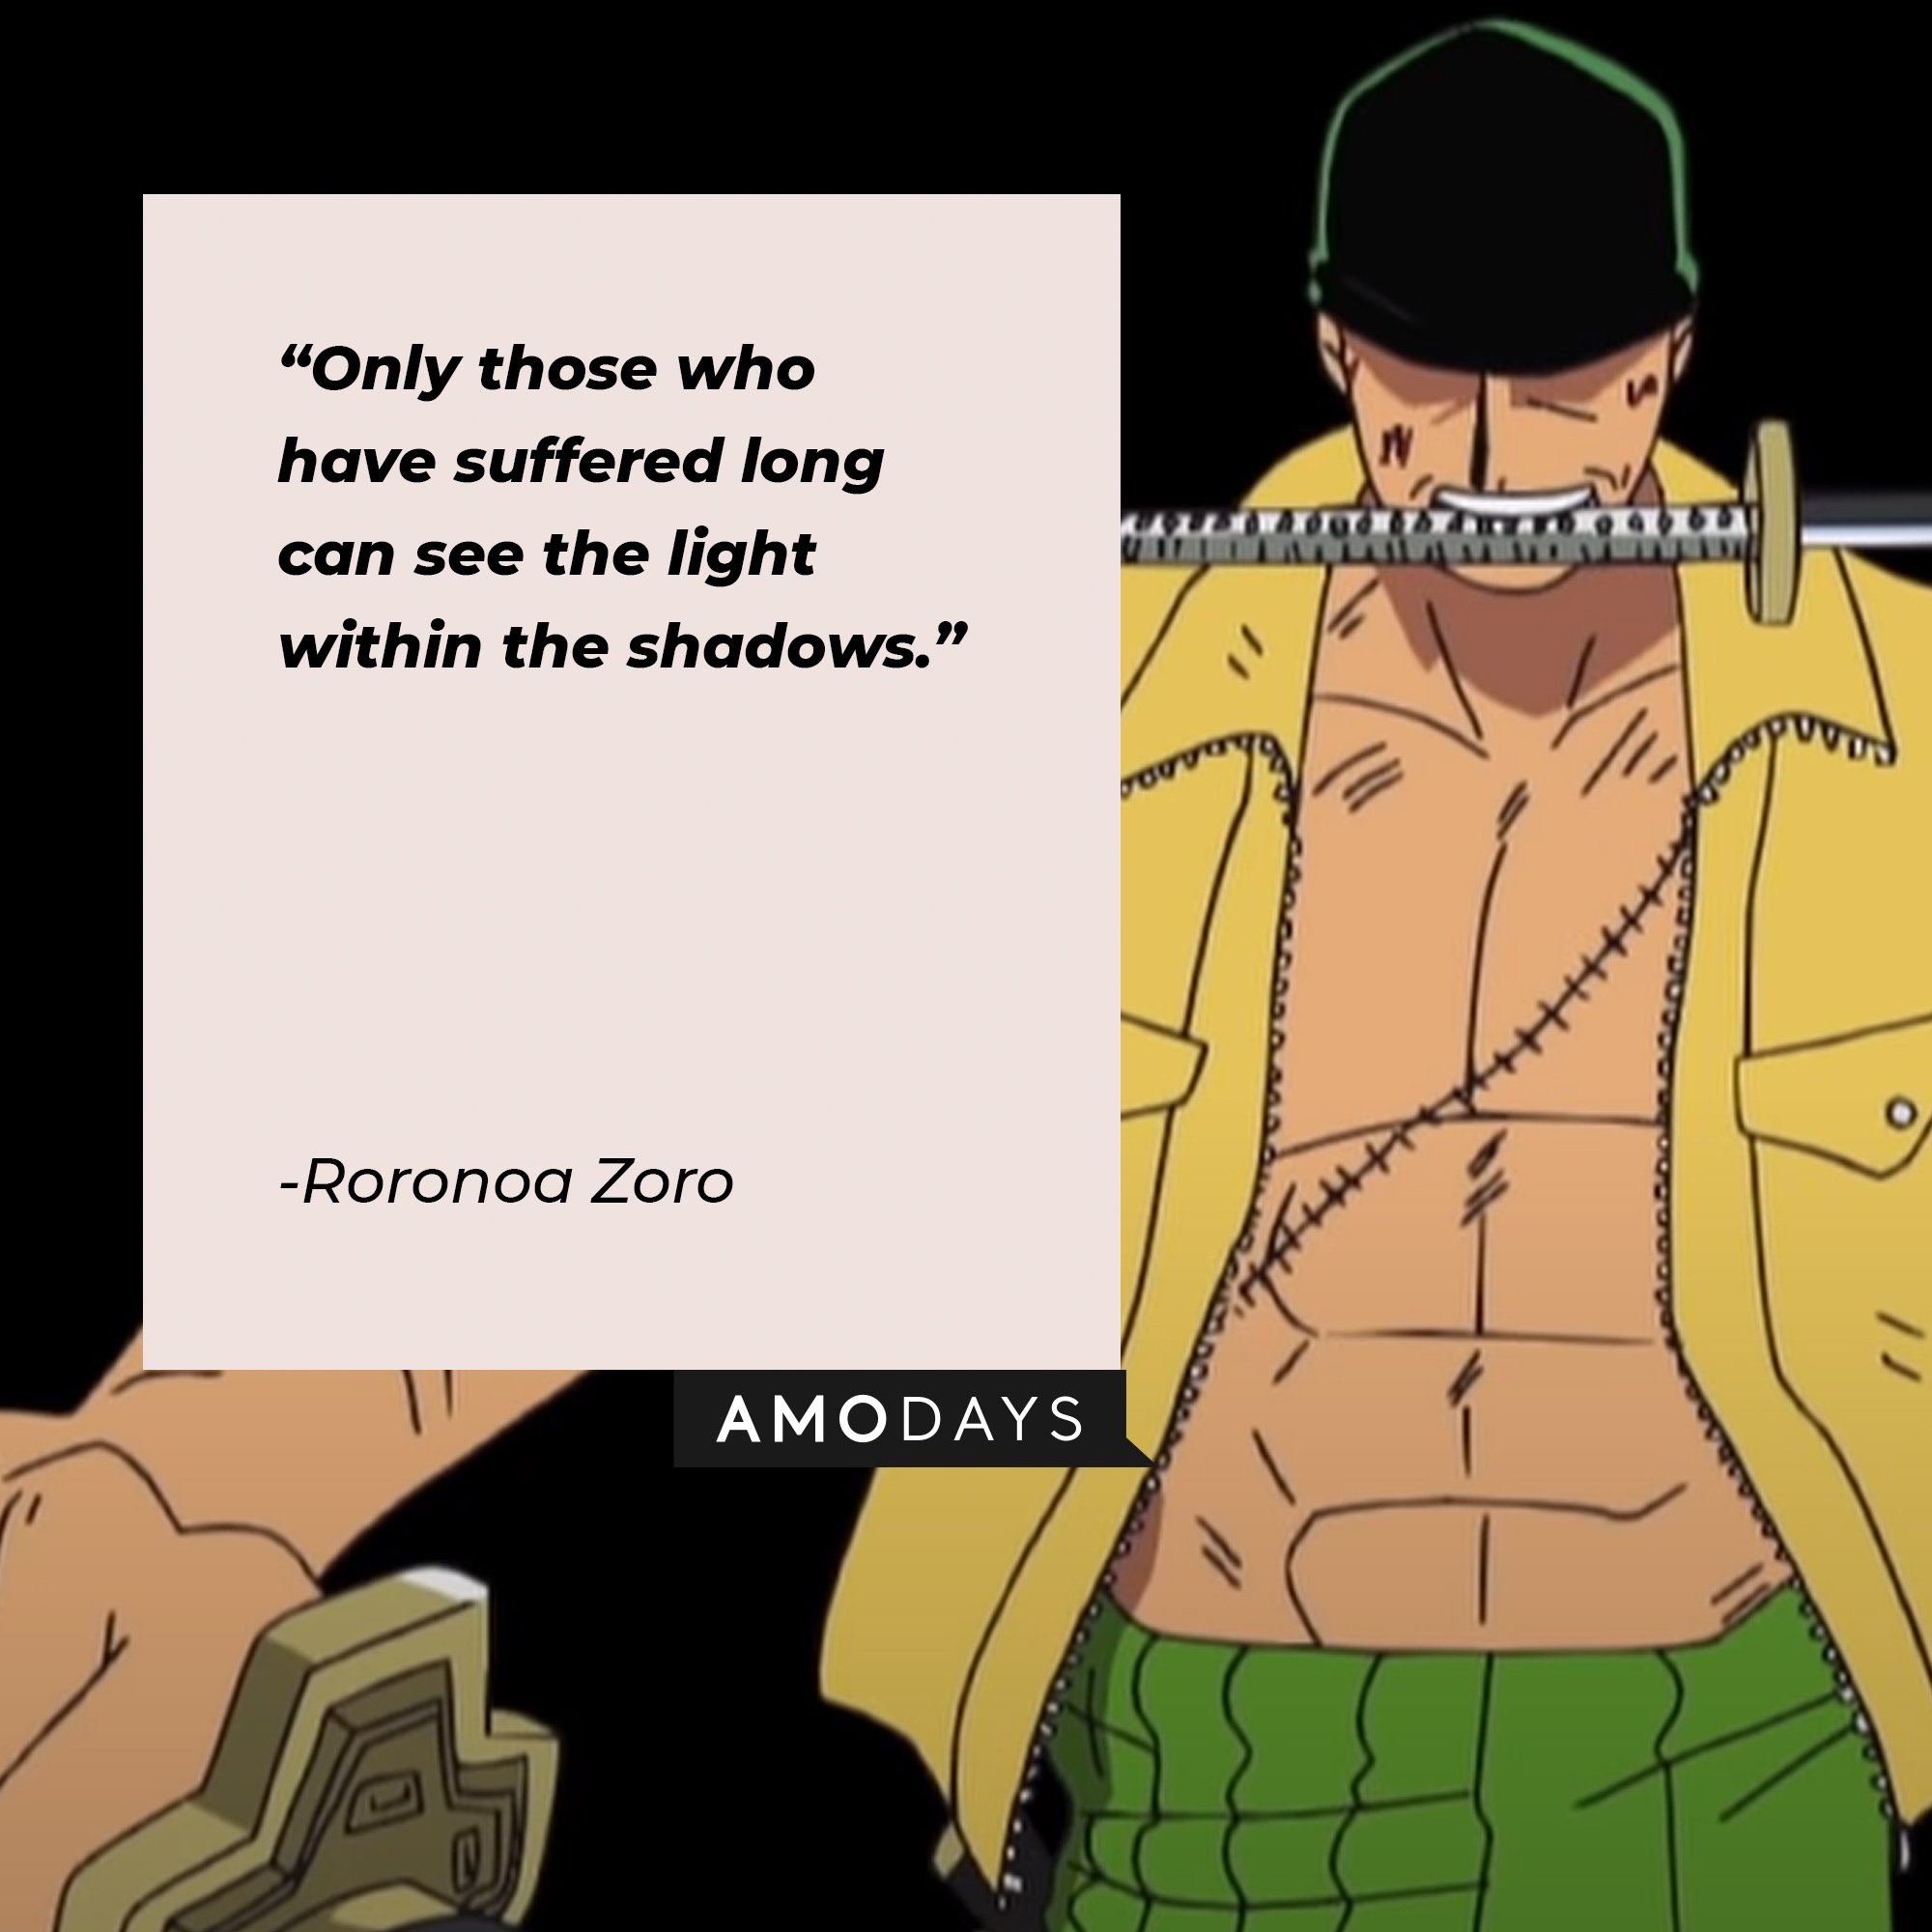 Roronoa Zoro’s quote: "Only those who have suffered long can see the light within the shadows." | Image: AmoDays